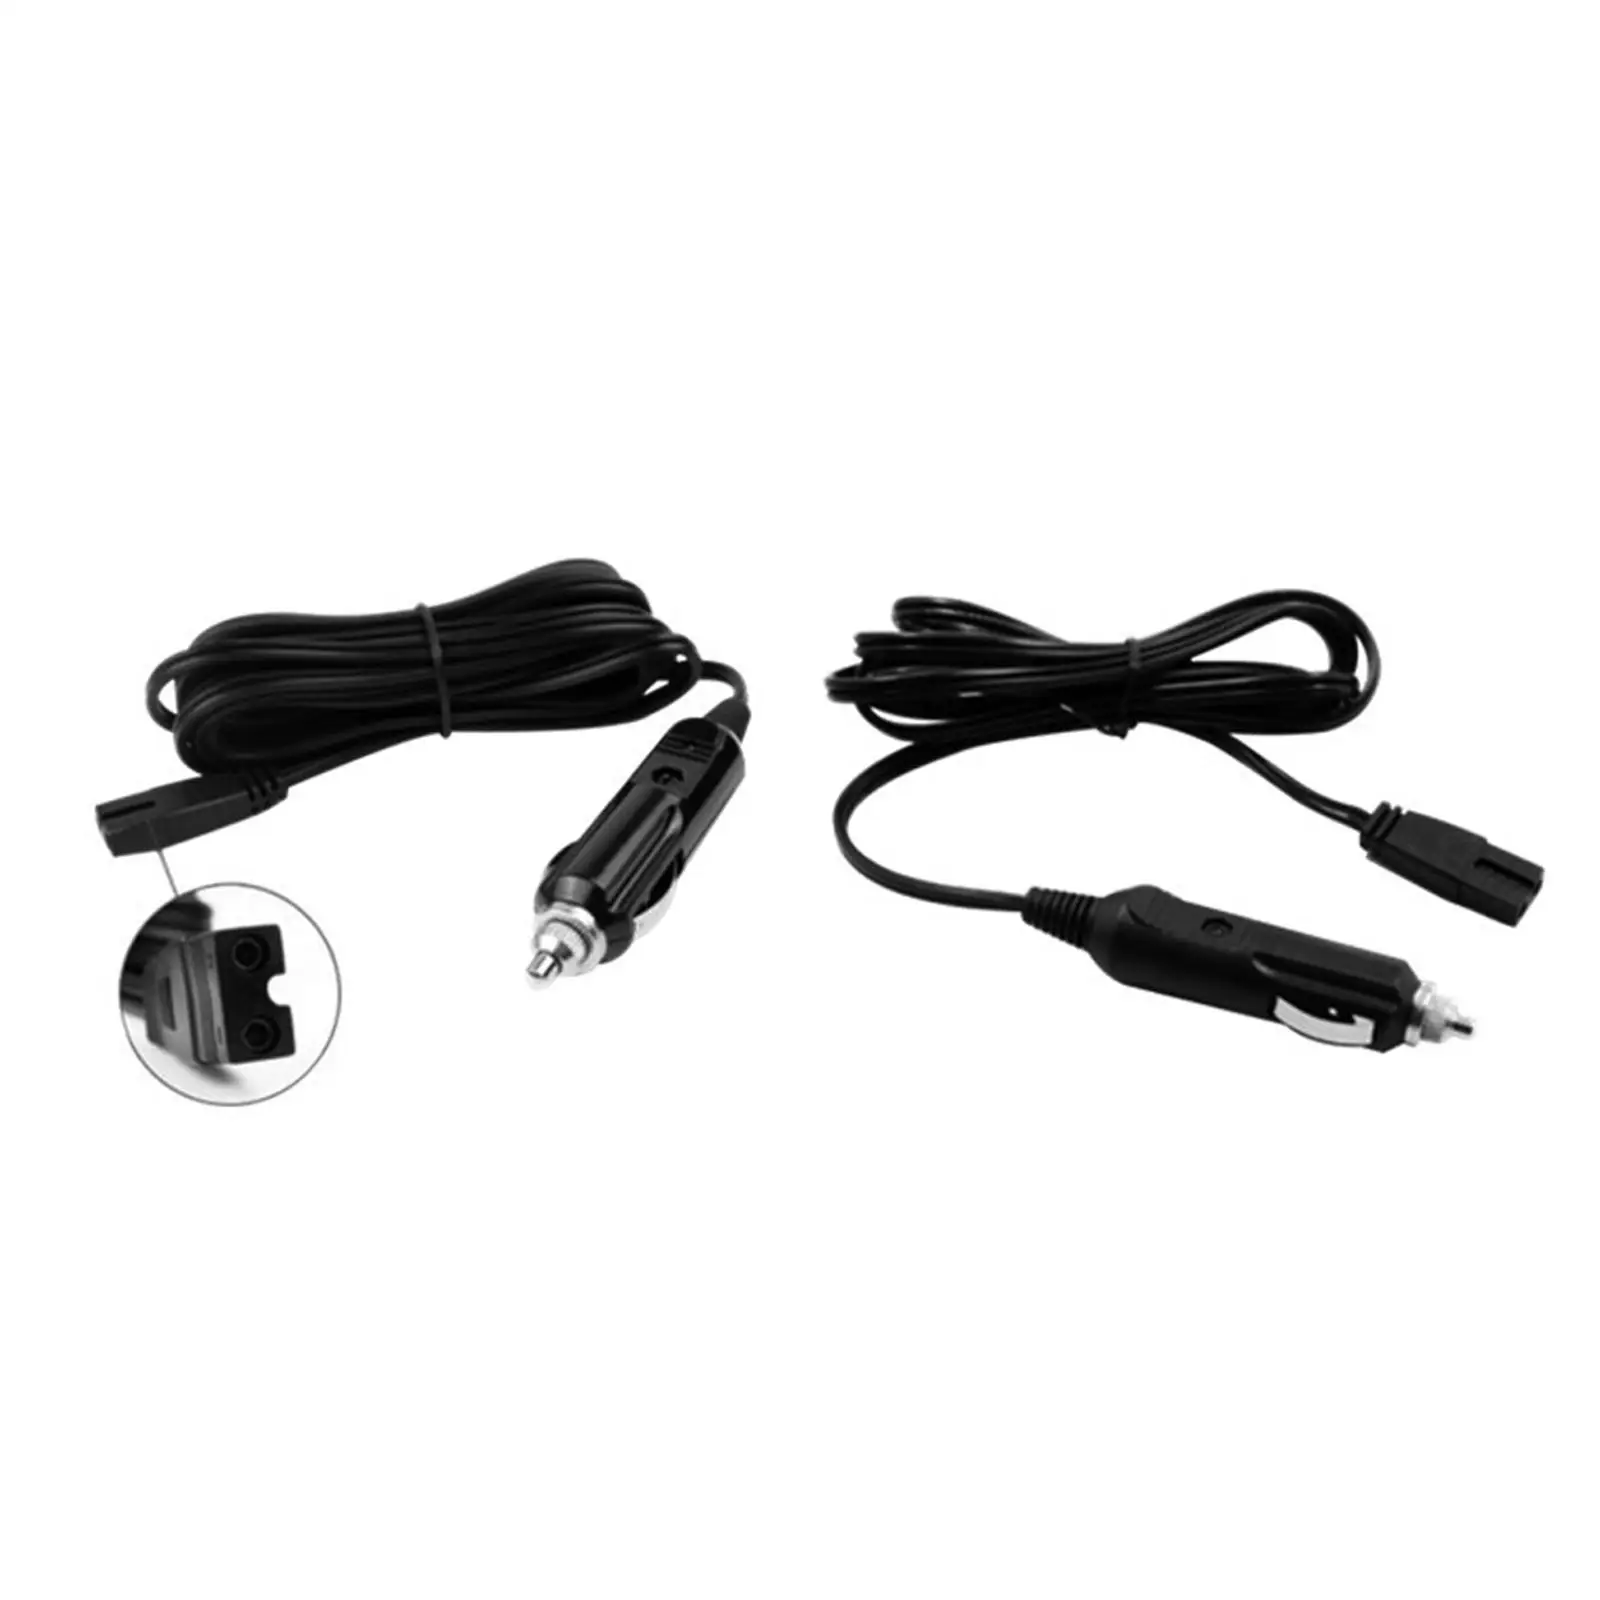 63inch Power Cable Cord DC 12V 24V for Car Refrigerator Cooler Simple Installation